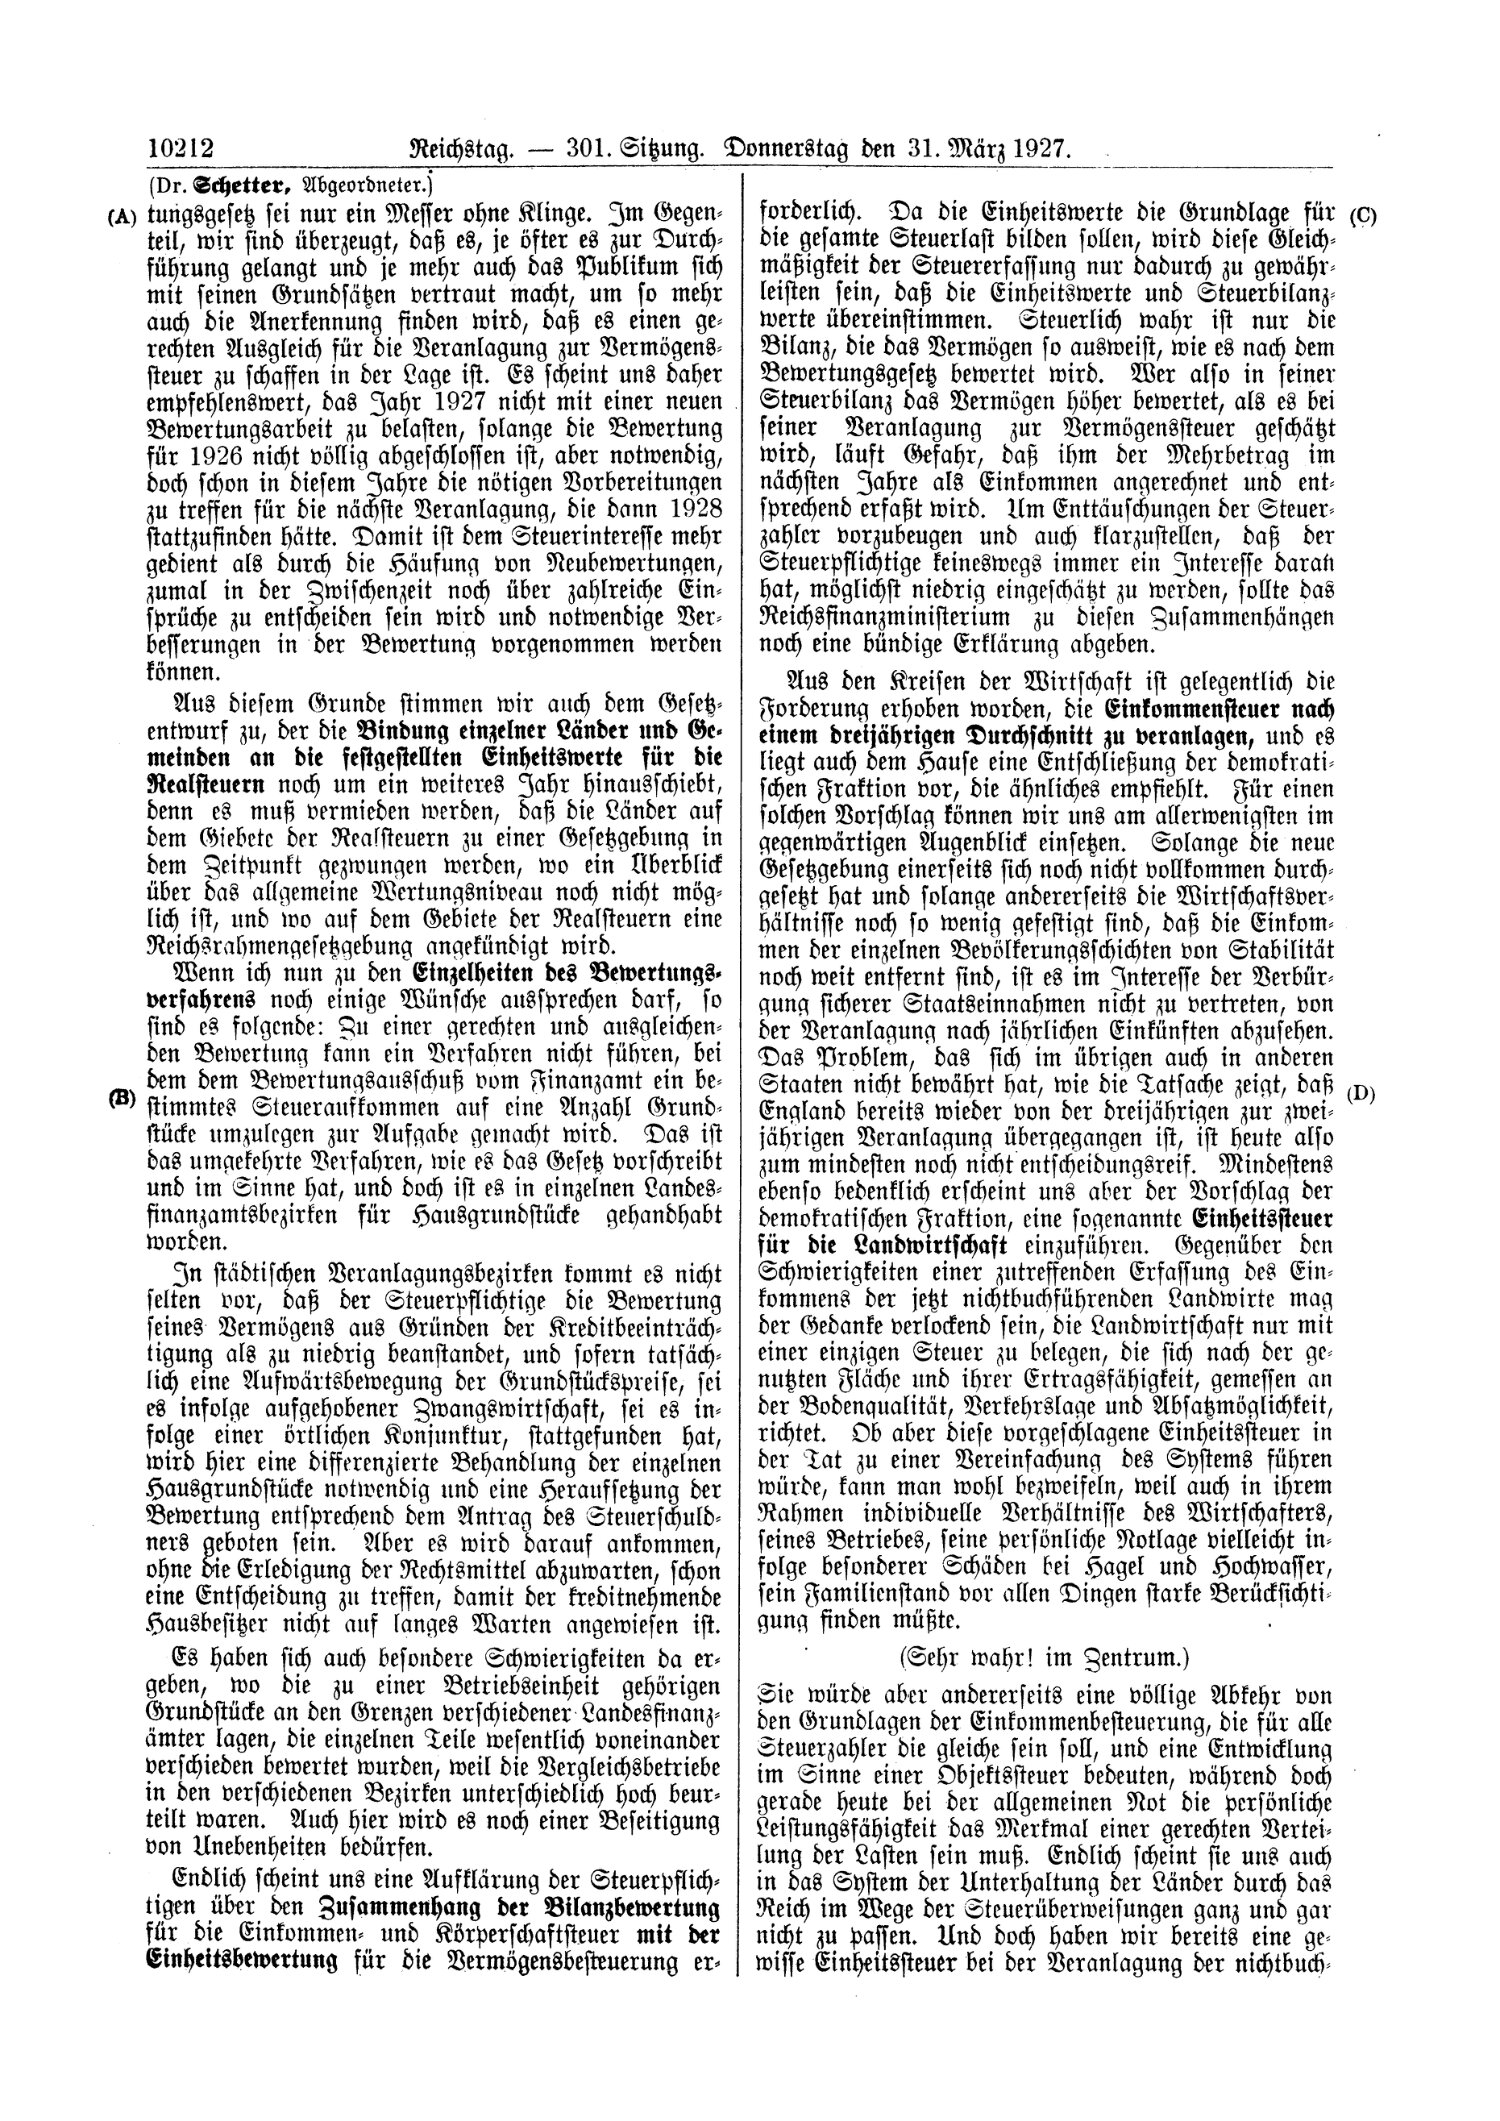 Scan of page 10212